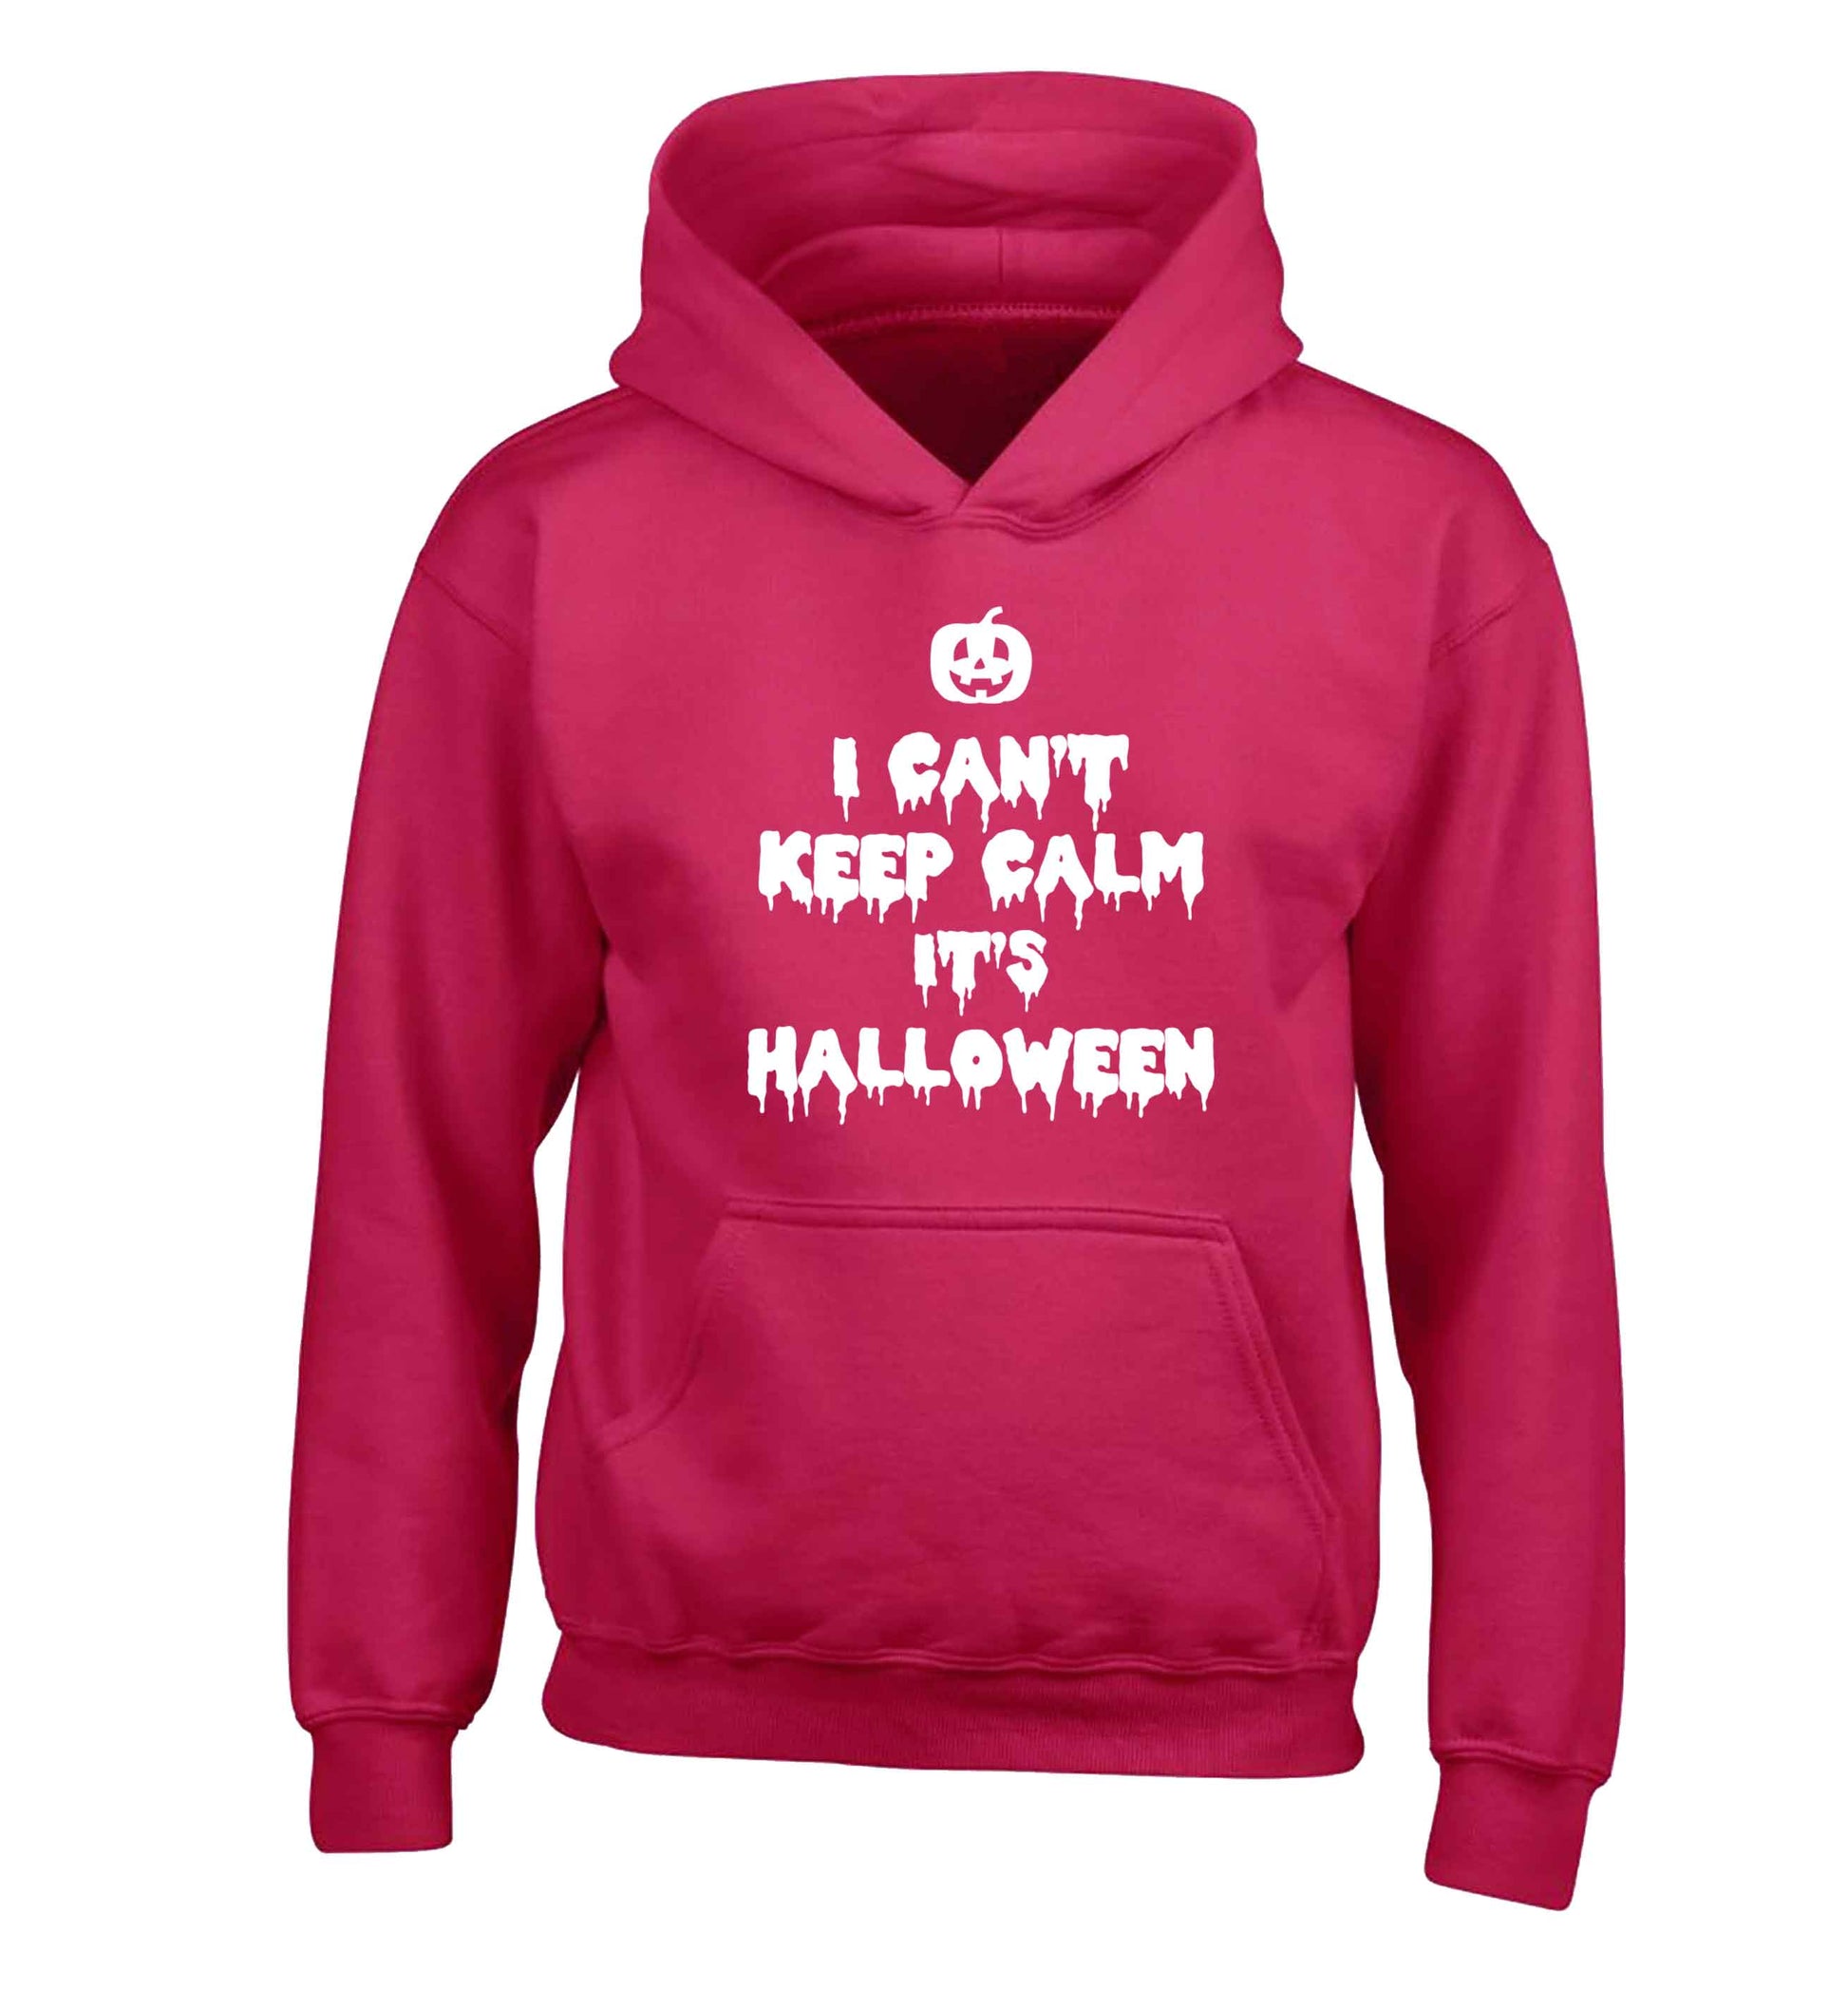 I can't keep calm it's halloween children's pink hoodie 12-13 Years